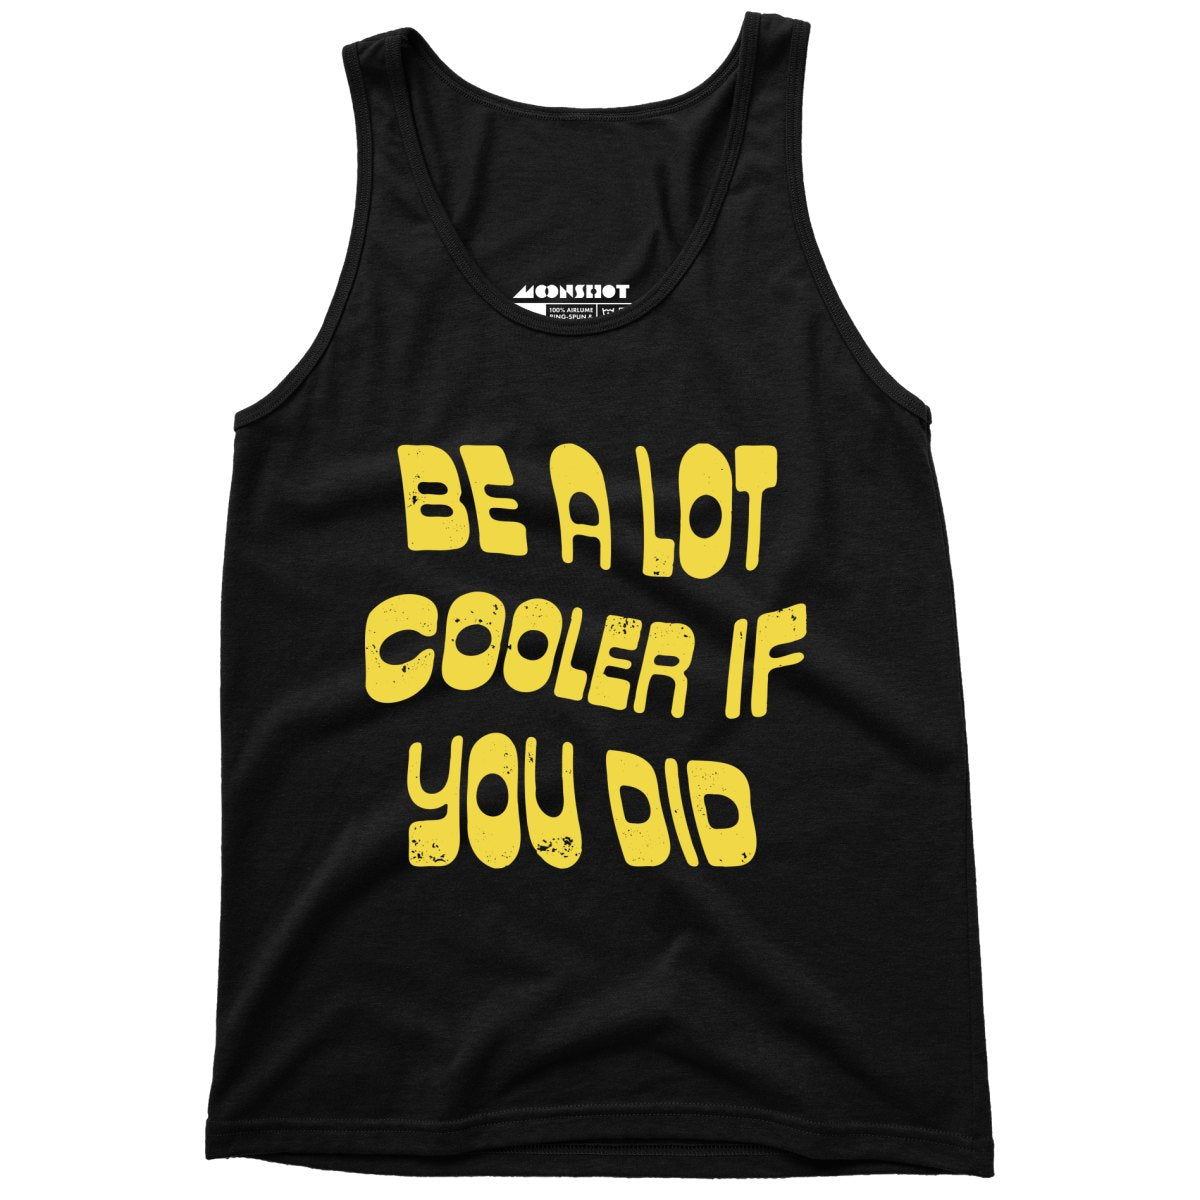 Be a Lot Cooler if You Did - Unisex Tank Top